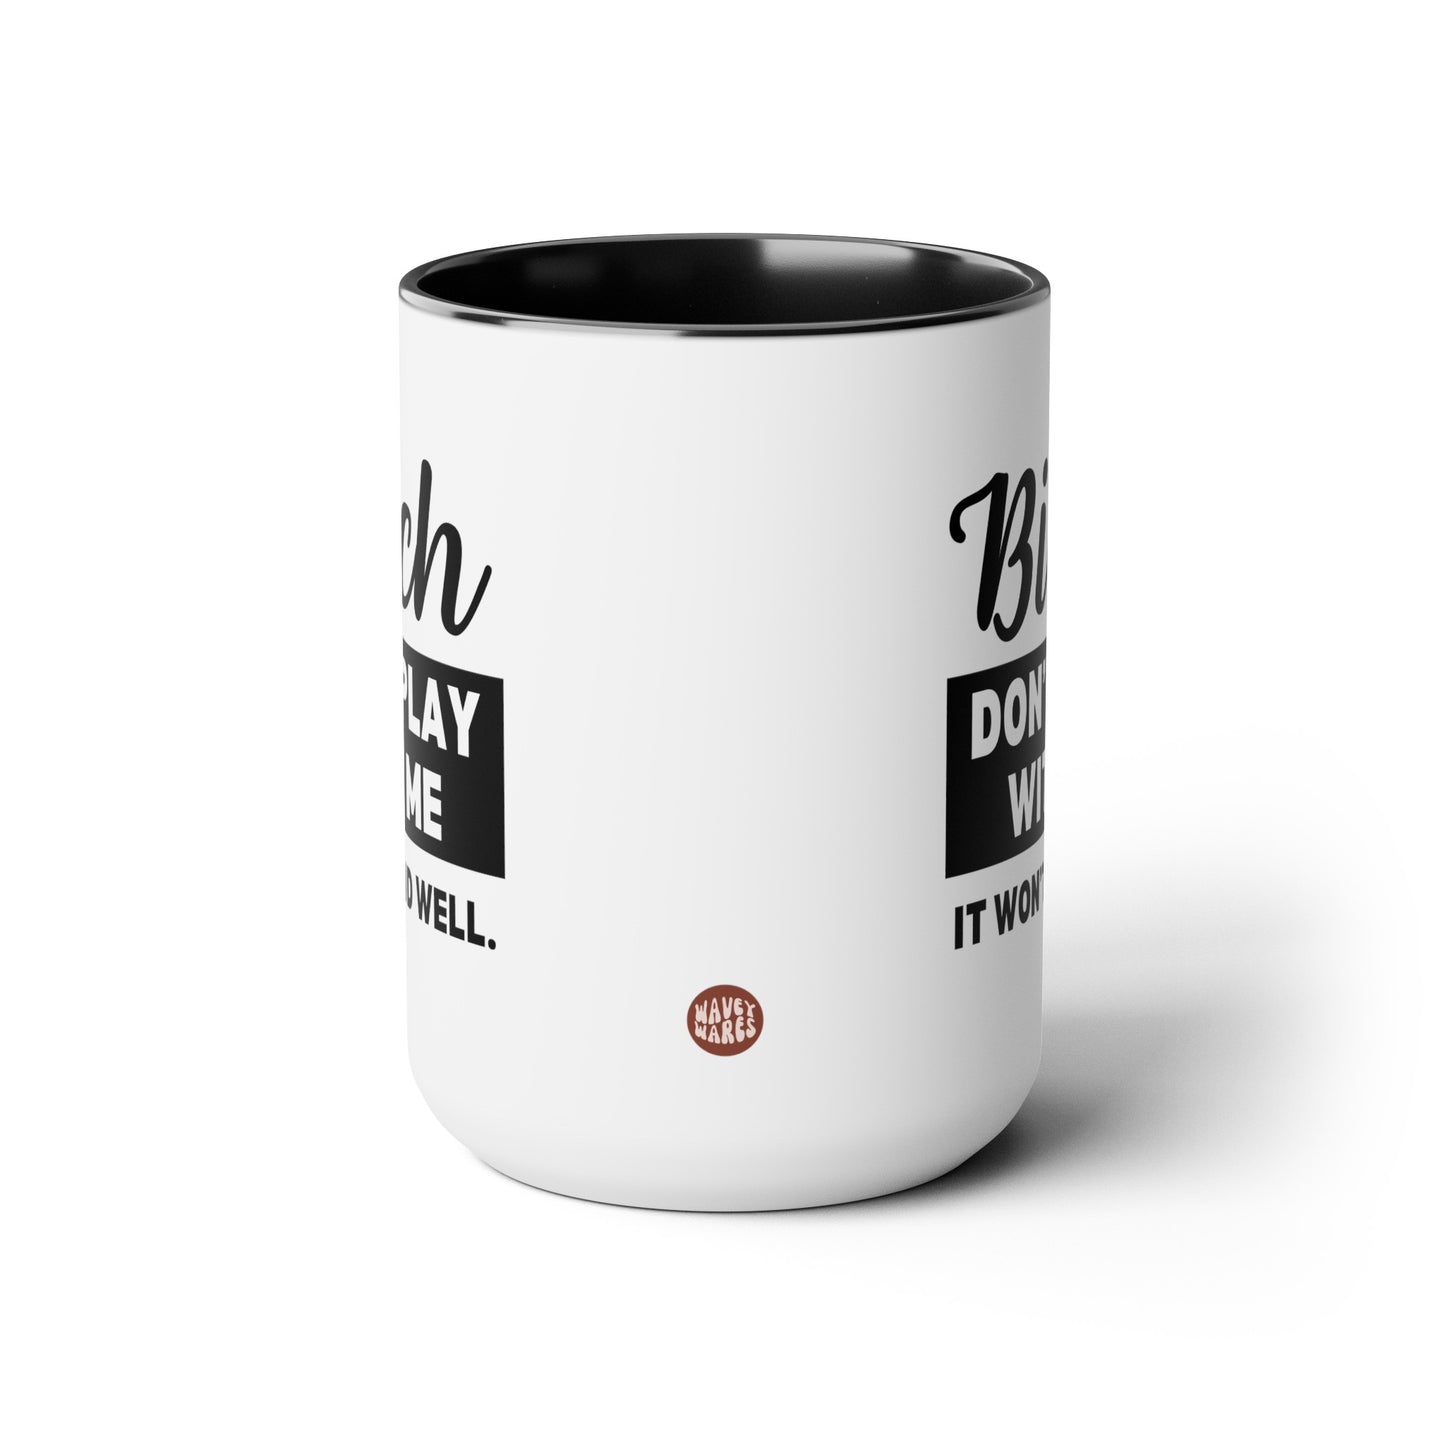 Bitch Don't Play With Me It Won't End Well 15oz white with black accent large big funny coffee mug tea cup gift for friend sarcastic sarcasm curse cuss rude novelty waveywares wavey wares wavywares wavy wares side